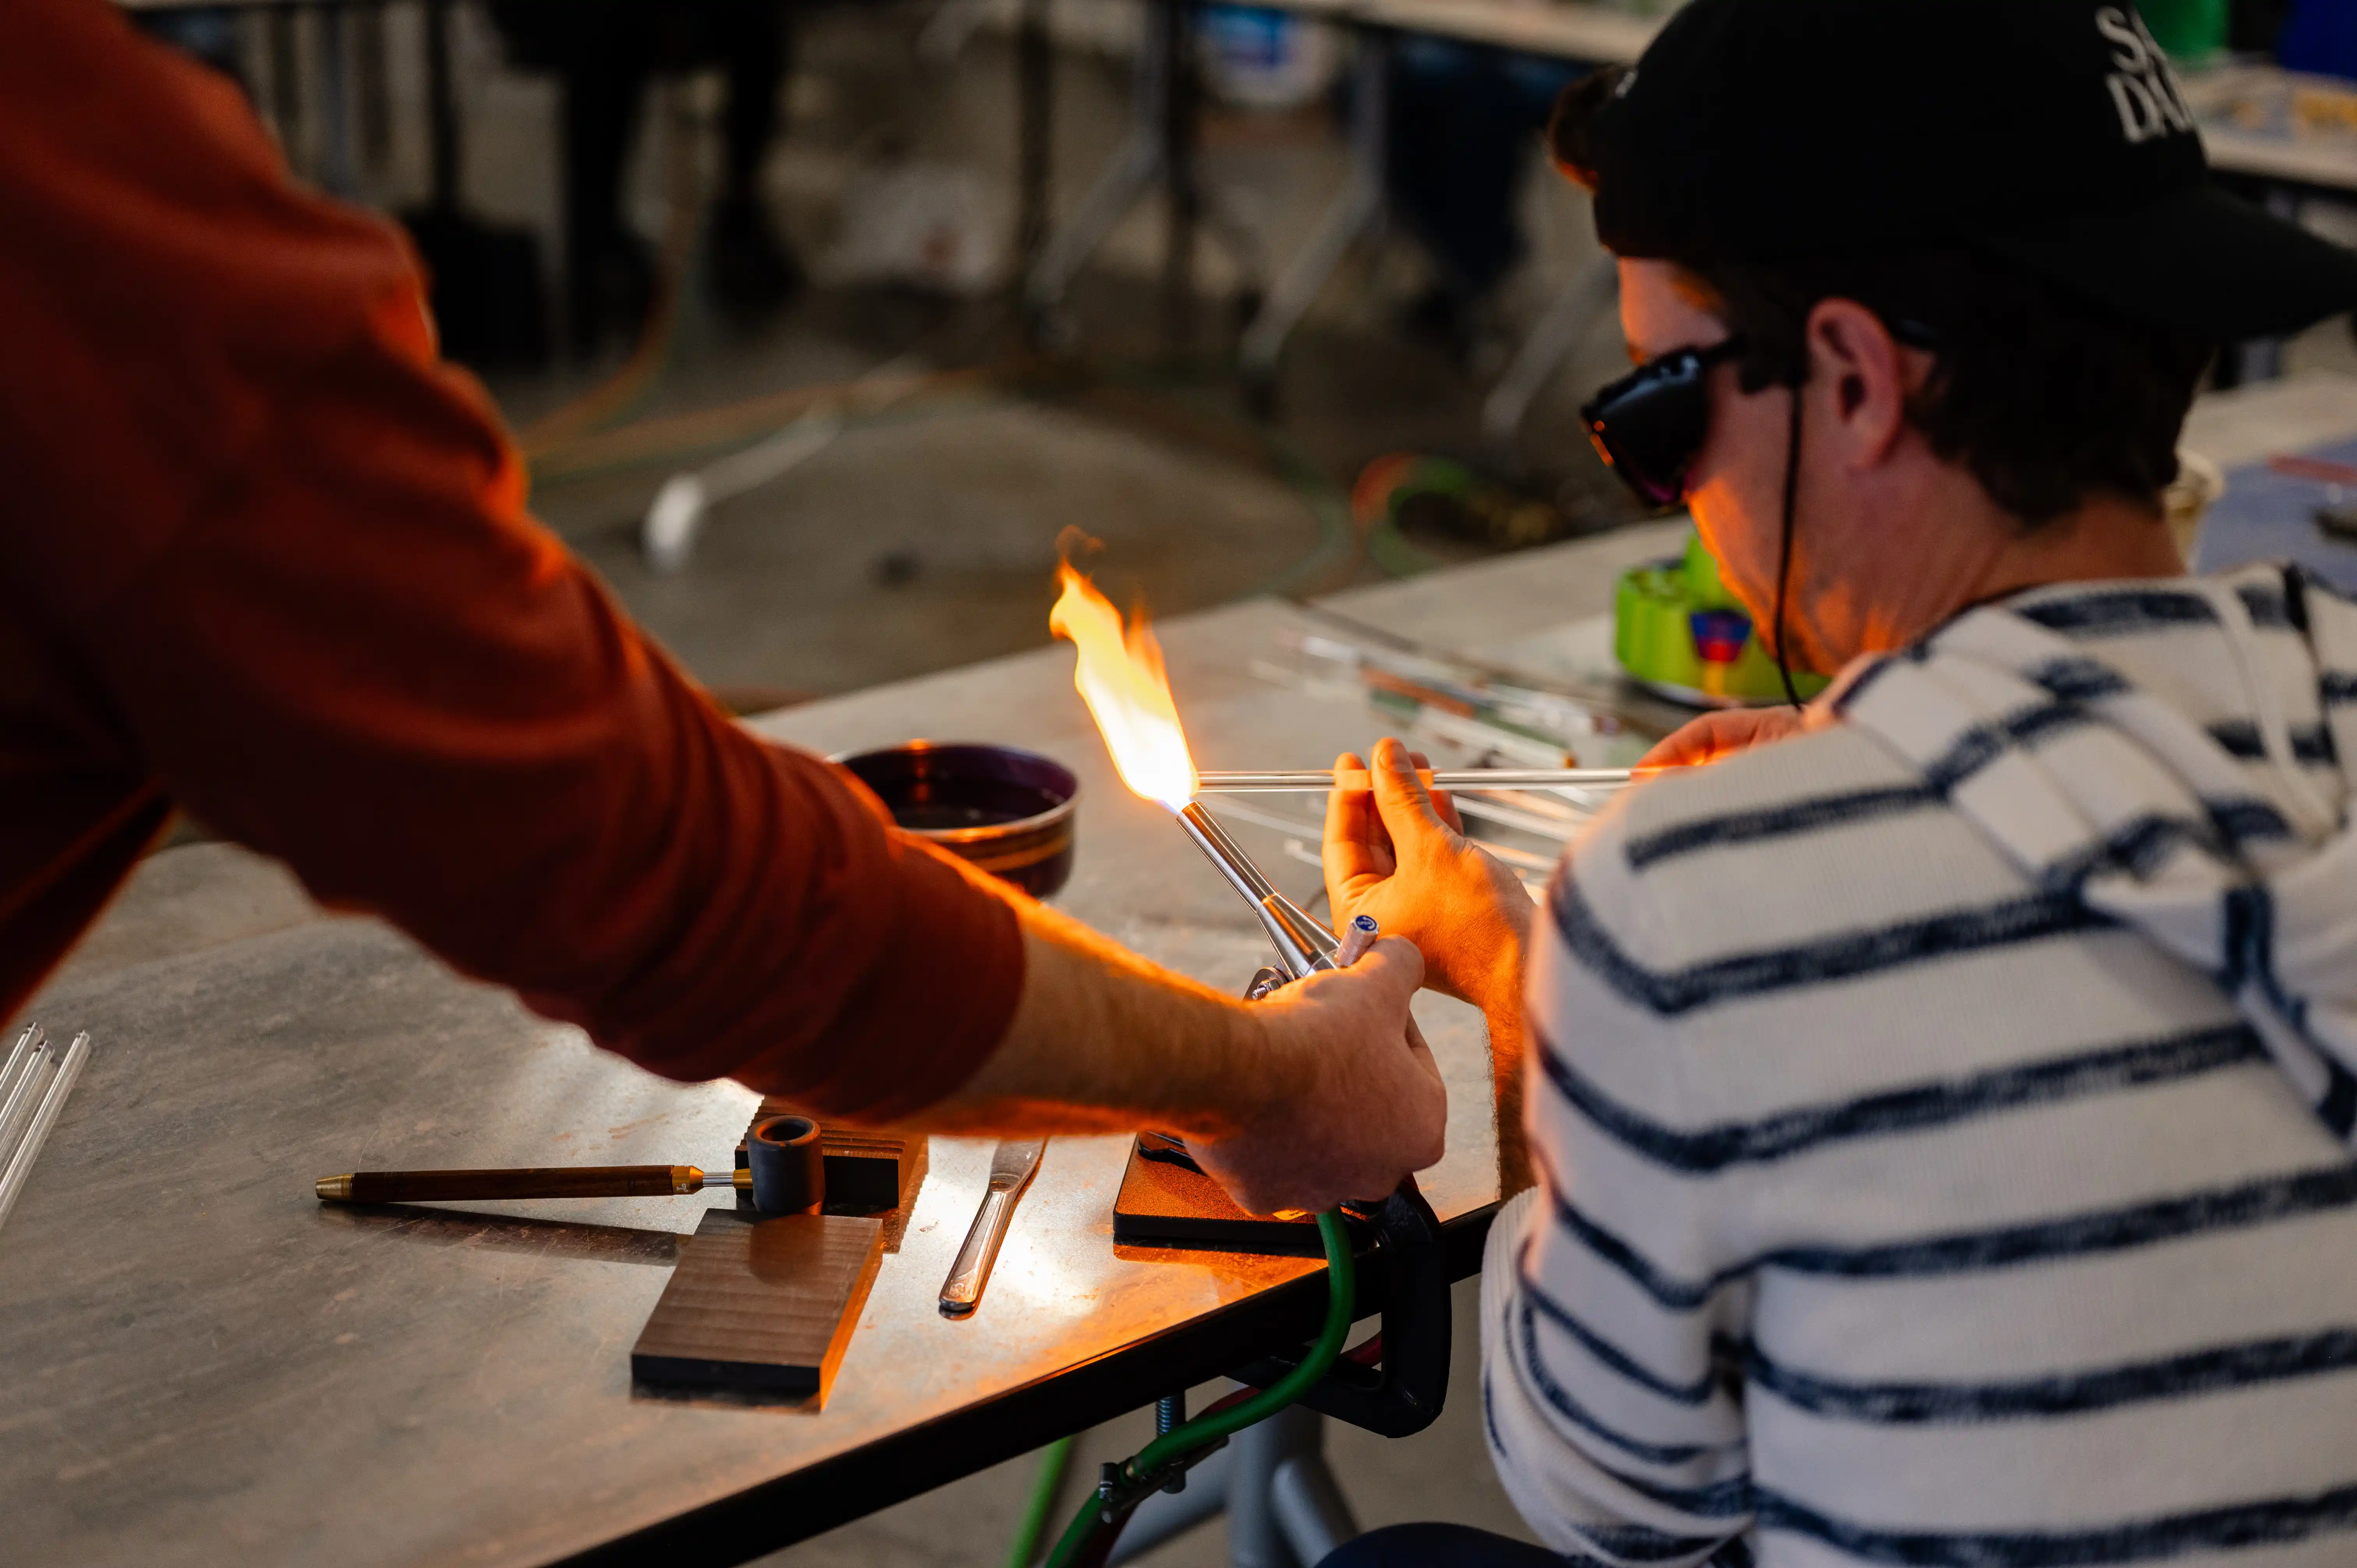 Two people shaping glass with a blowtorch in a workshop setting.